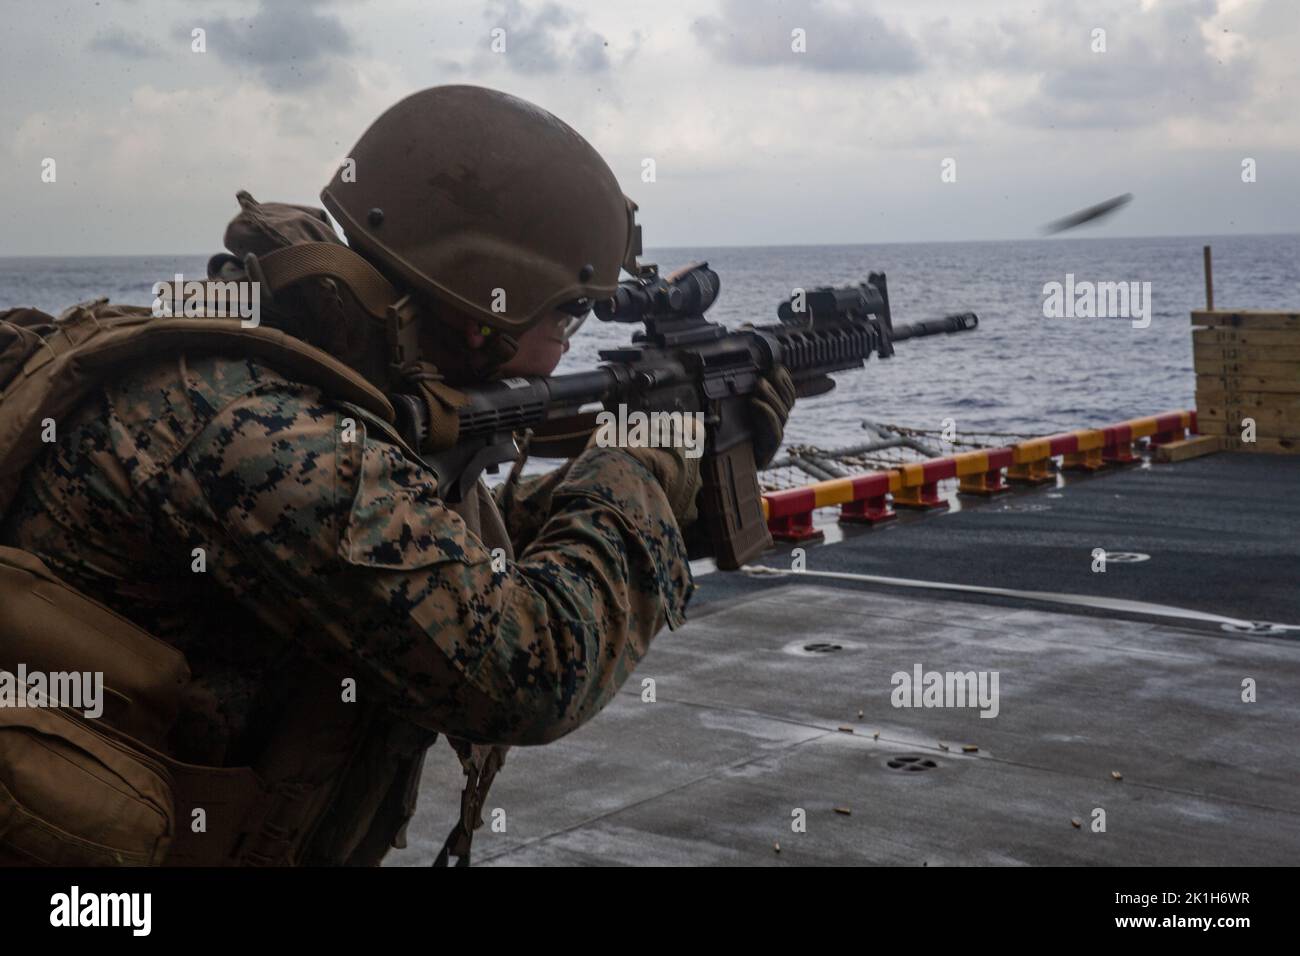 U.S. Marine Corps Lance Cpl. Austin Aguirre, a supply chain management specialist, with Battalion Landing Team 2/5, 31st Marine Expeditionary Unit, conducts shooting drills aboard Amphibious Assault Ship USS Tripoli (LHA-7), in the Philippine Sea, Sept. 14, 2022. The Marines conducted shooting drills to maintain their expertise in marksmanship. The 31st MEU is operating aboard ships of the Tripoli Amphibious Ready Group in the 7th Fleet area of operations to enhance interoperability with allies and partners and serve as a ready response force to defend peace and stability in the Indo-Pacific r Stock Photo